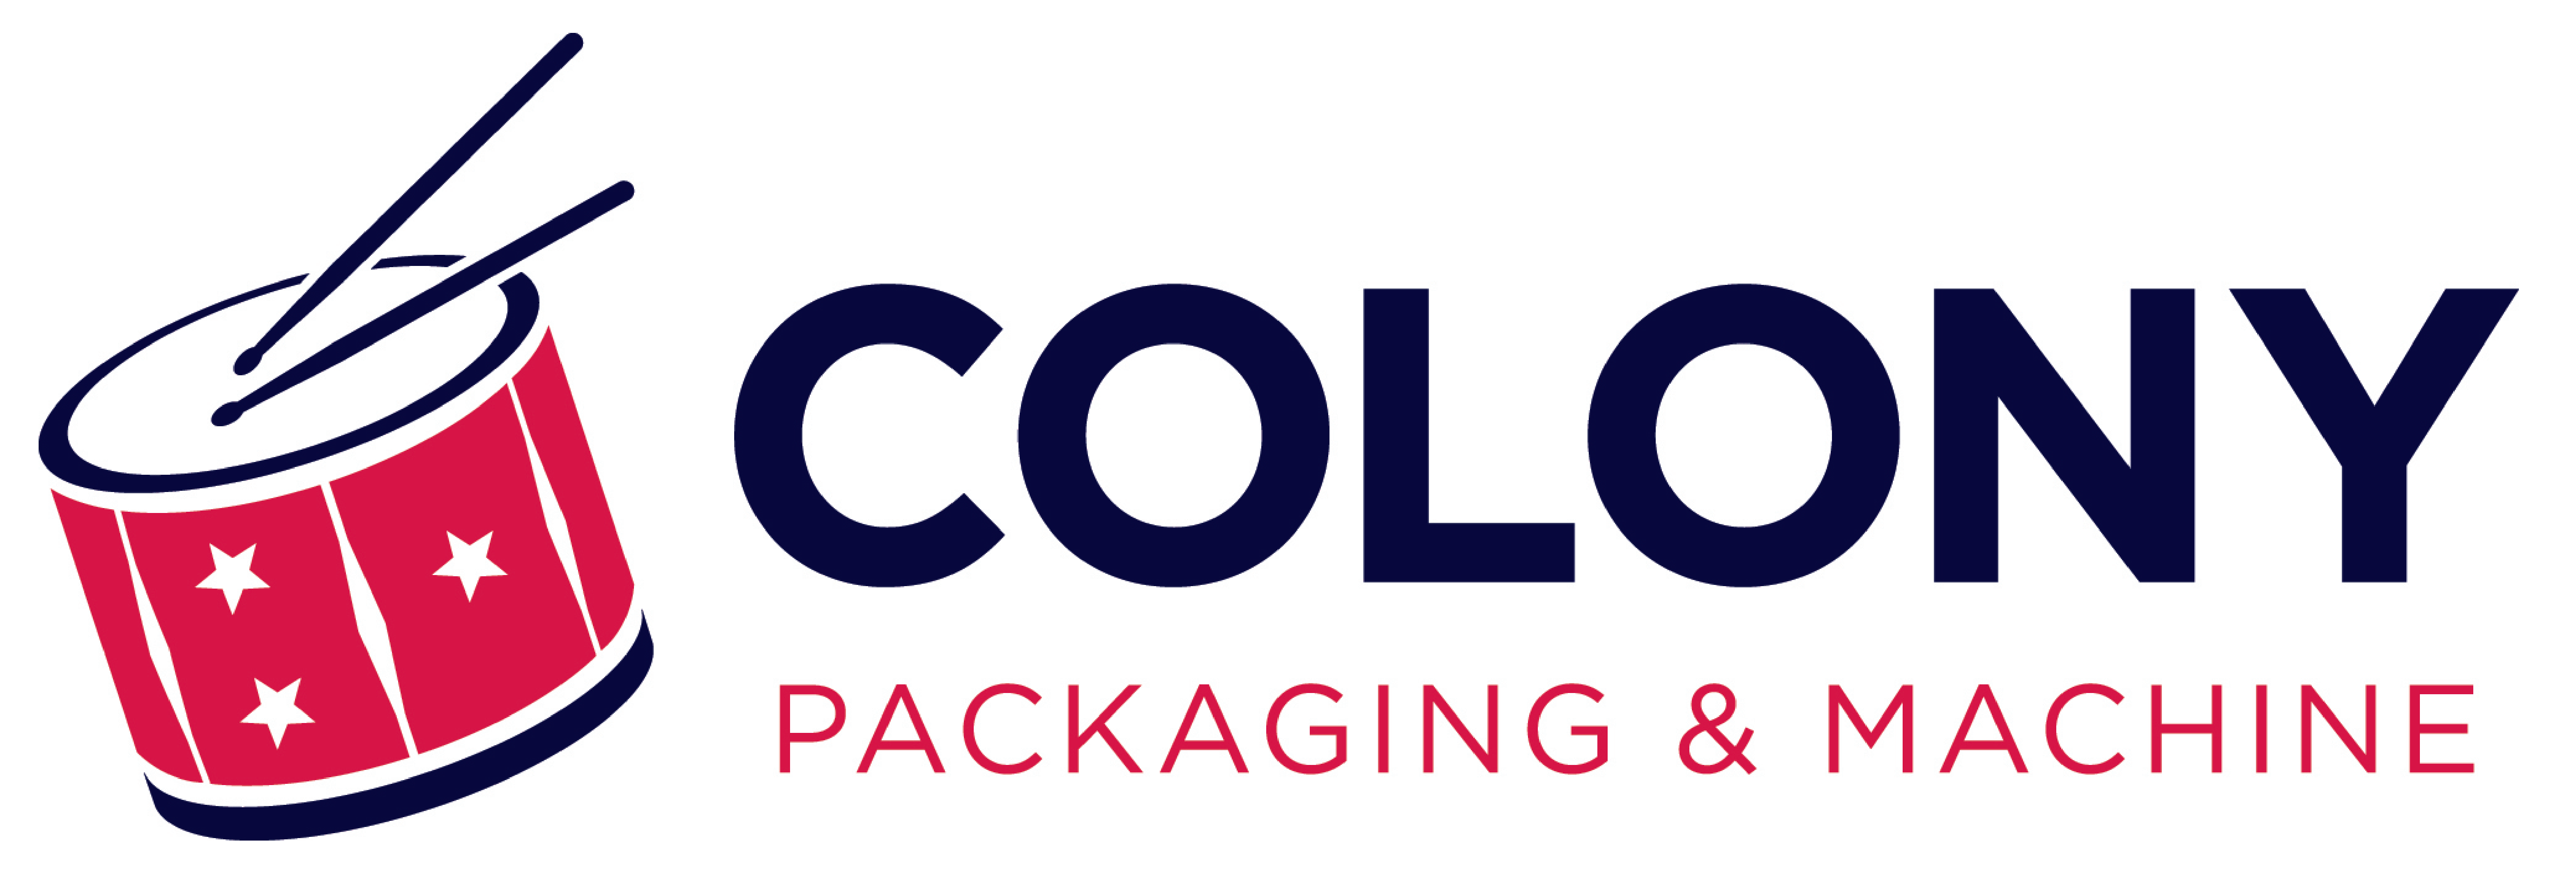 Colony Packaging & Machine